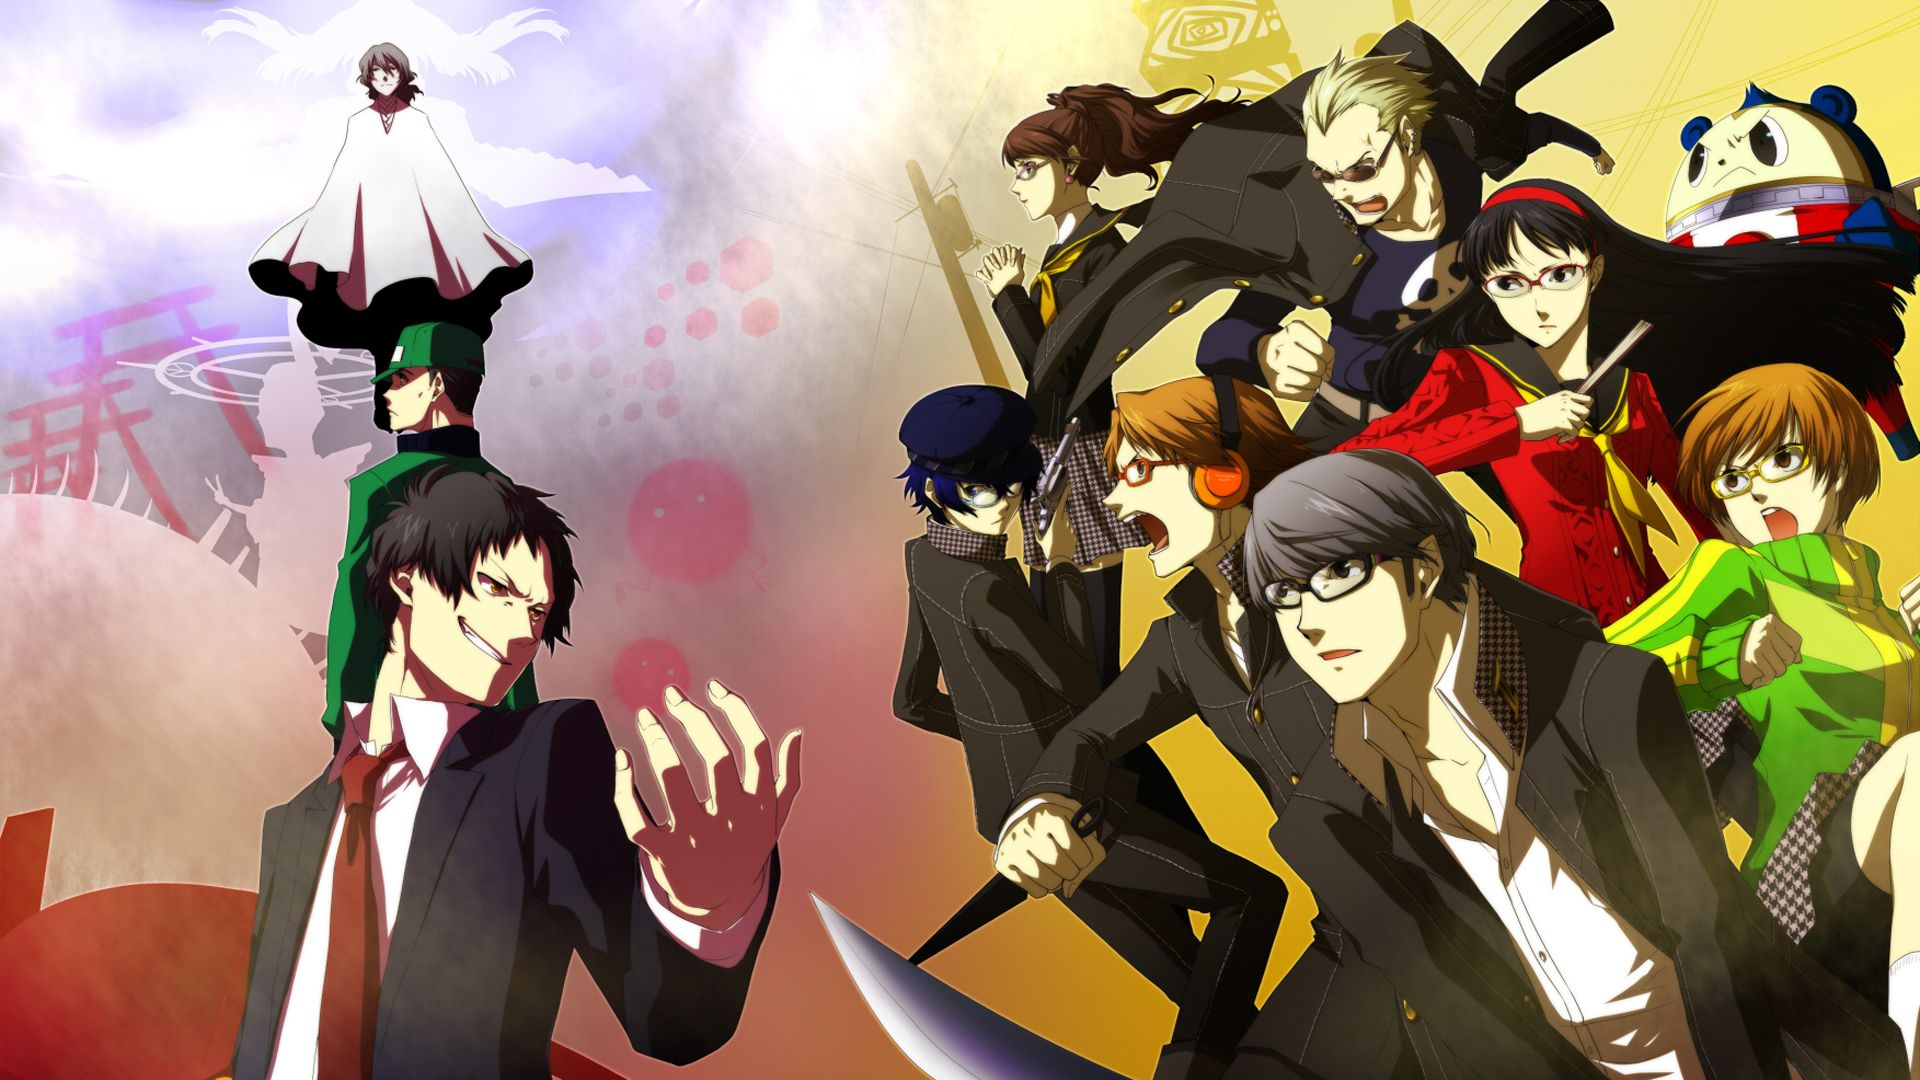 1920x1080 Persona 4 Wallpapers Top Free Persona 4 Backgrounds